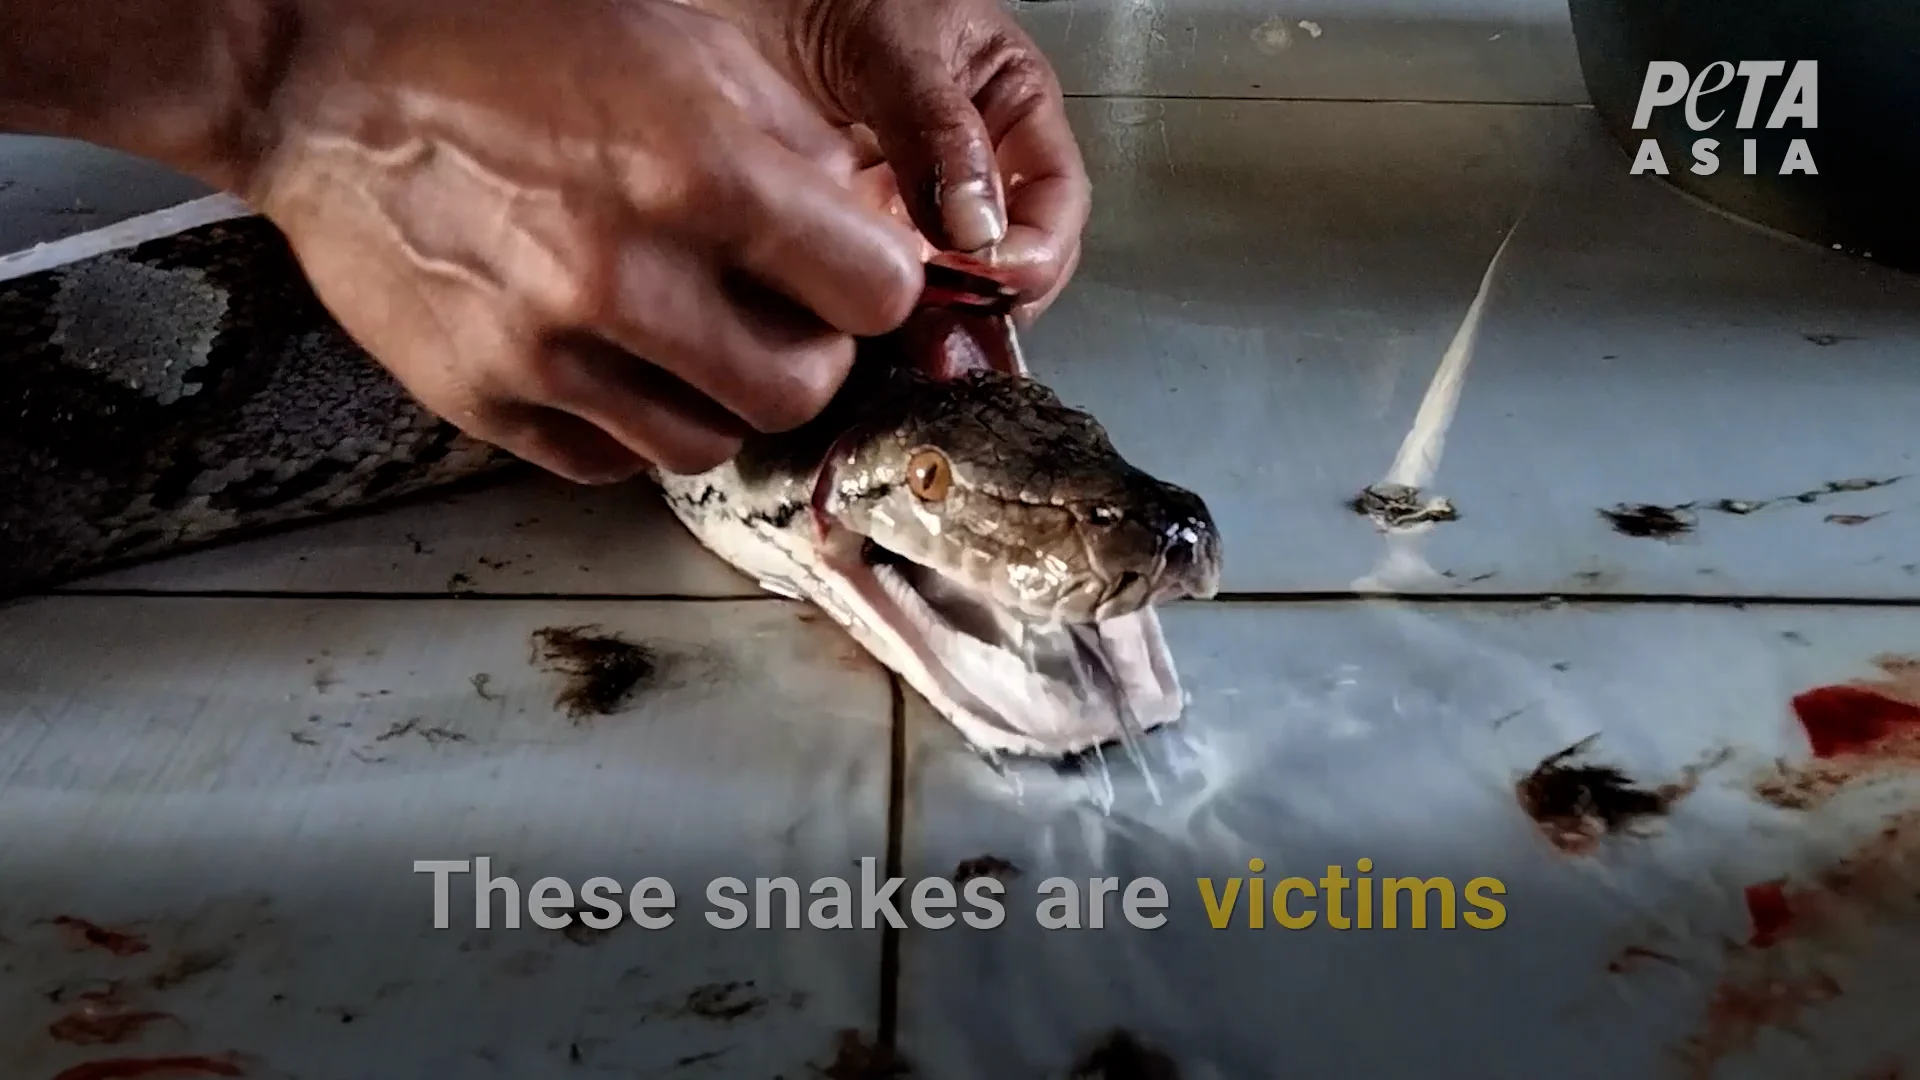 Louis Vuitton Owner Exposé: Workers Inflate Live Snakes to Make Leather 